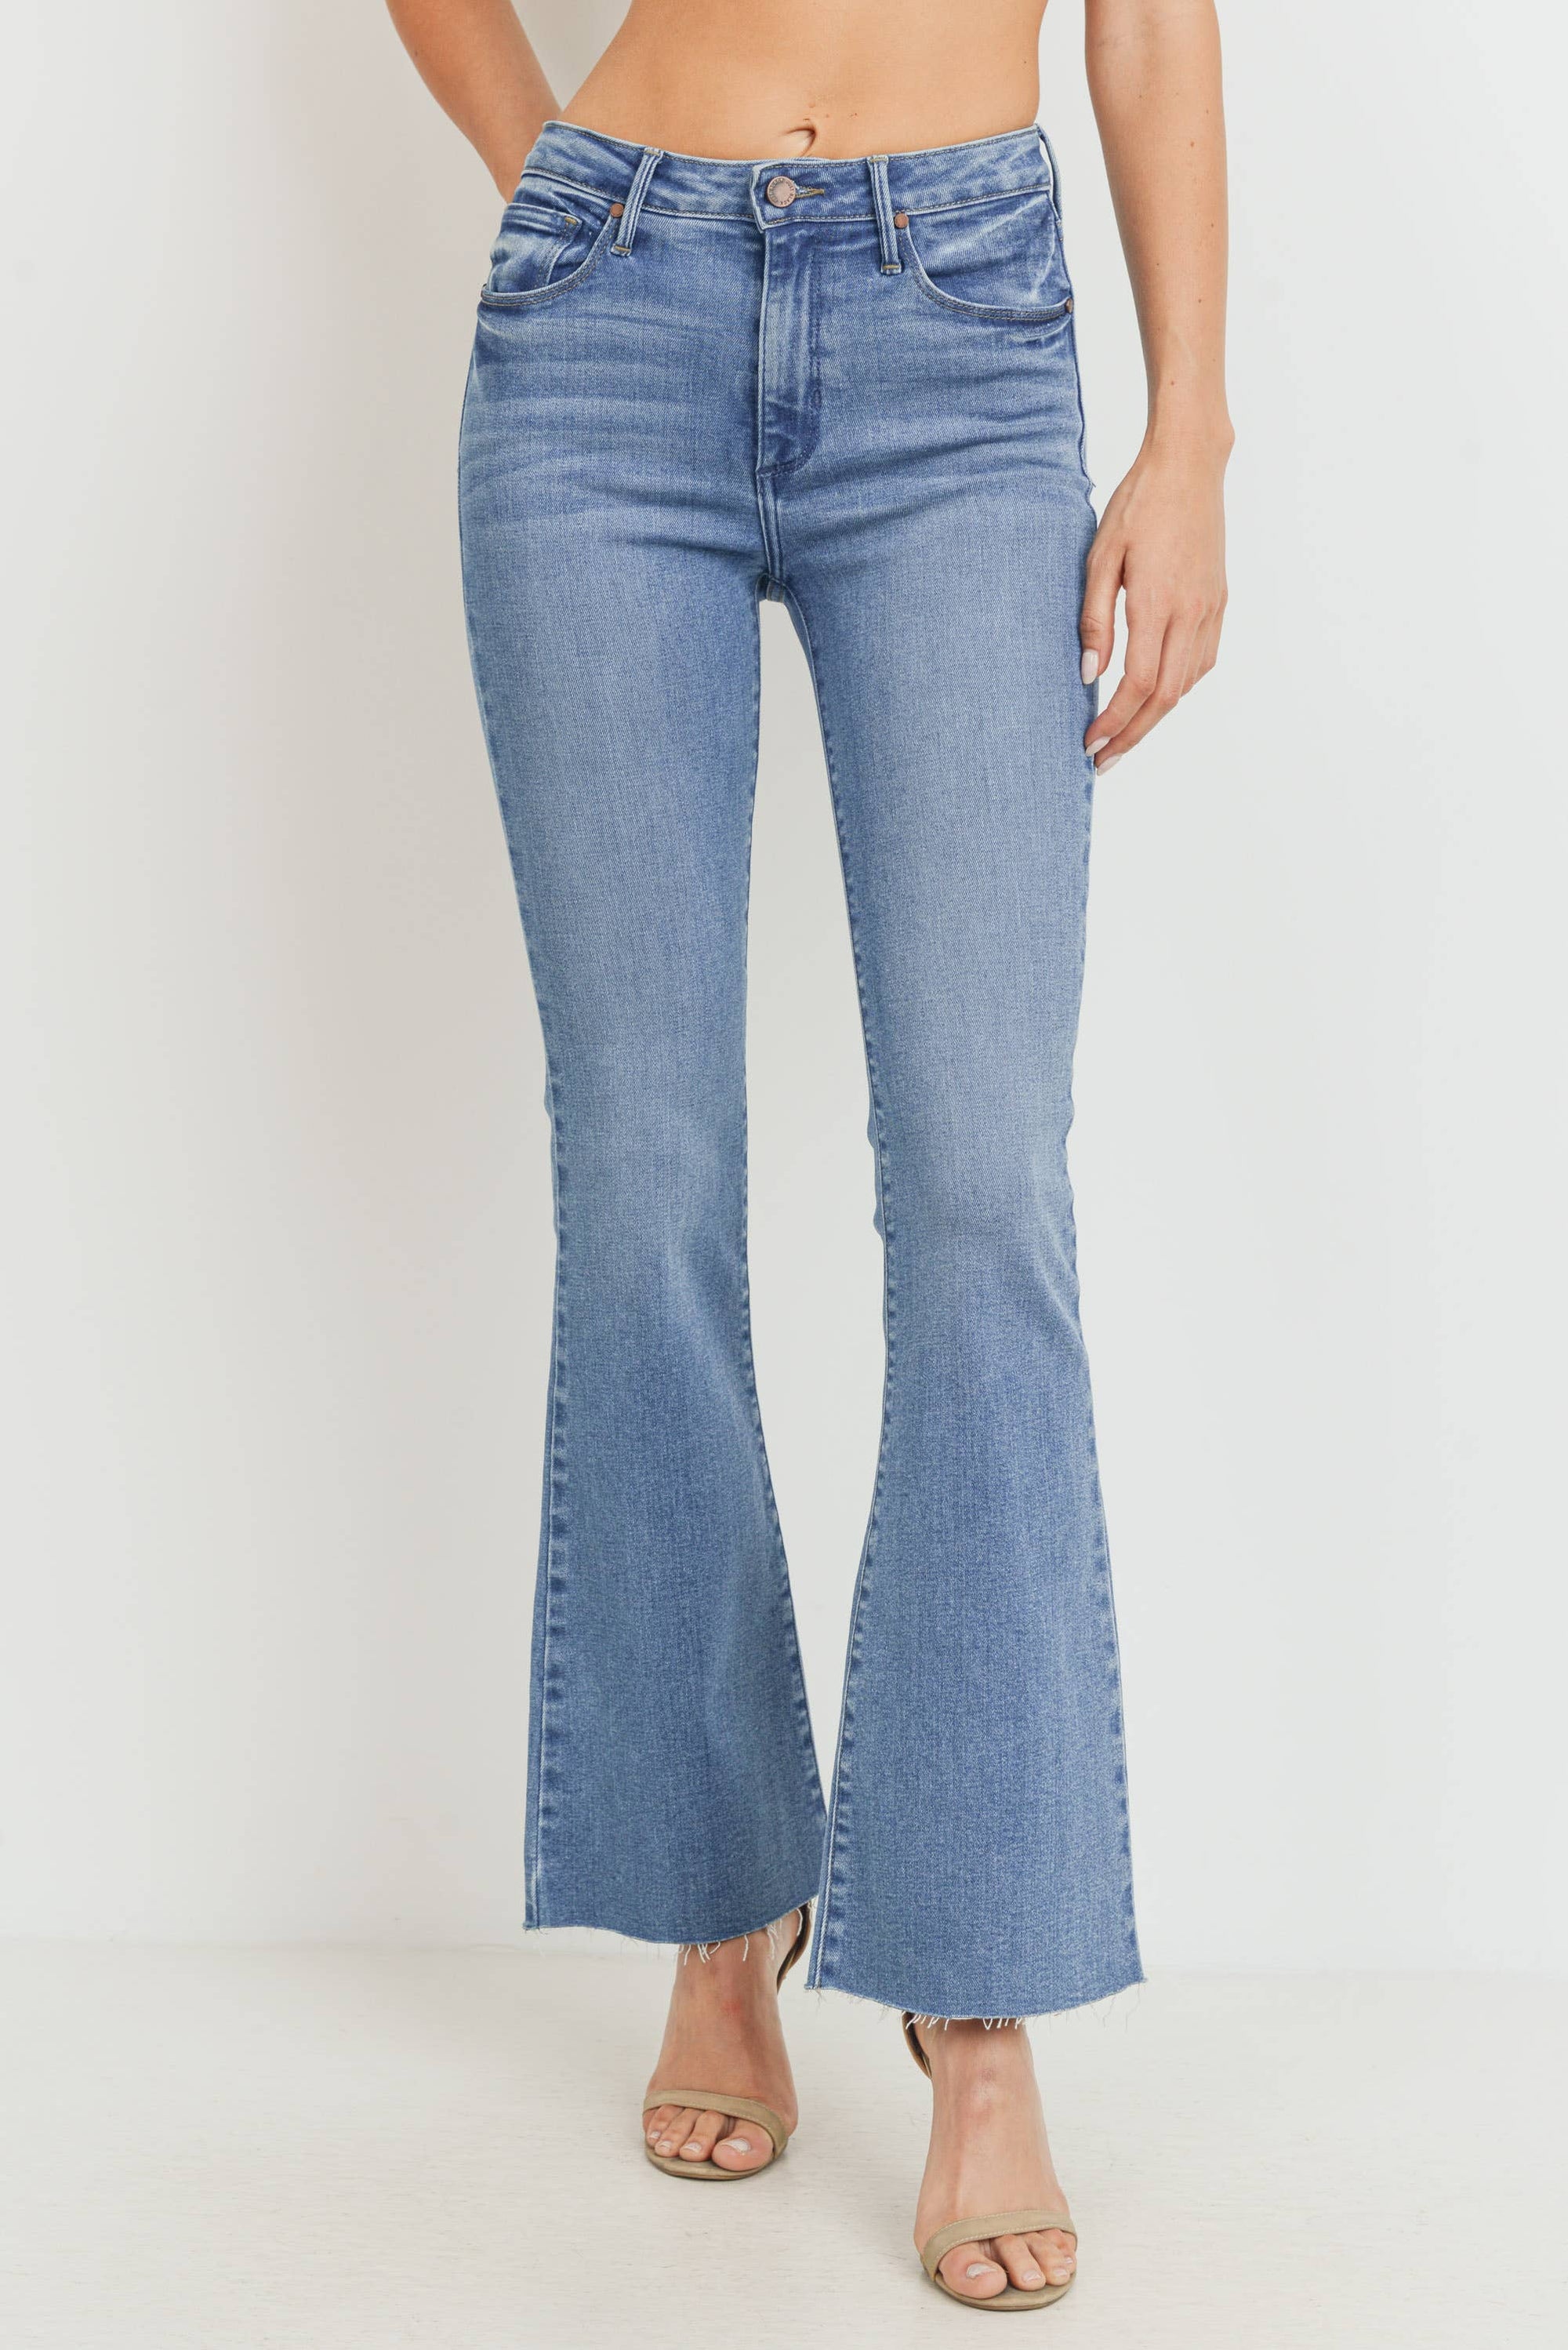 The Athena High Rise Flares by Just Black Denim